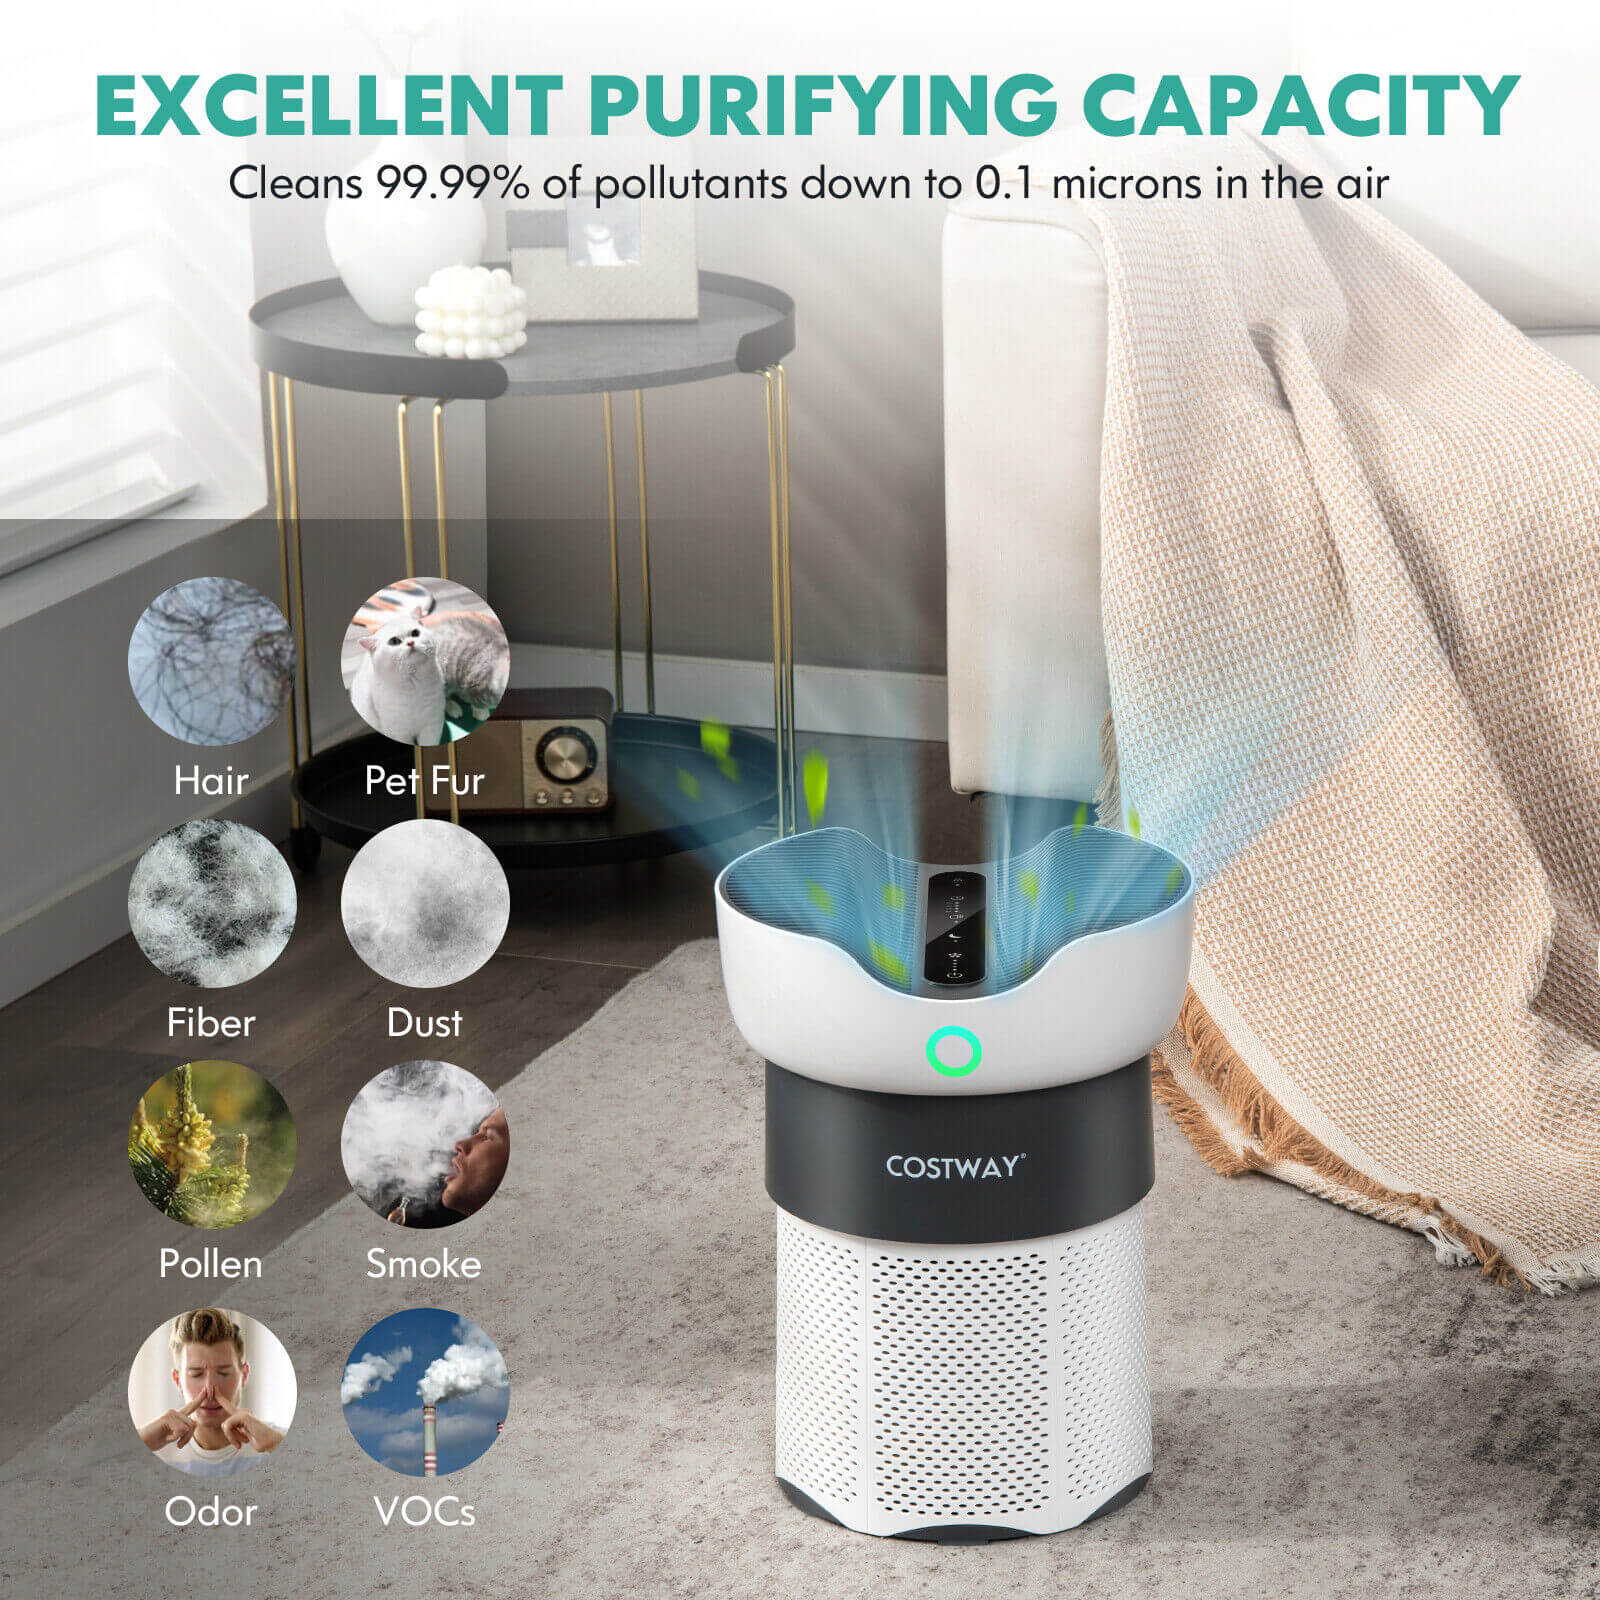 High-Efficiency Purification: This air purifier achieves high-efficiency purification by eliminating 99.99% of pollutants measuring as small as 0.1 microns. It efficiently refreshes the air within an area of up to 1300 sq. ft in just 60 minutes. The pre-filter intercepts hair, fibers, large particles, dander, and more, while the true H13 HEPA filter effectively removes small particles like dust and pollen. Additionally, the activated carbon filter eliminates smoke, odors, cooking smells, and other unpleasant odors.